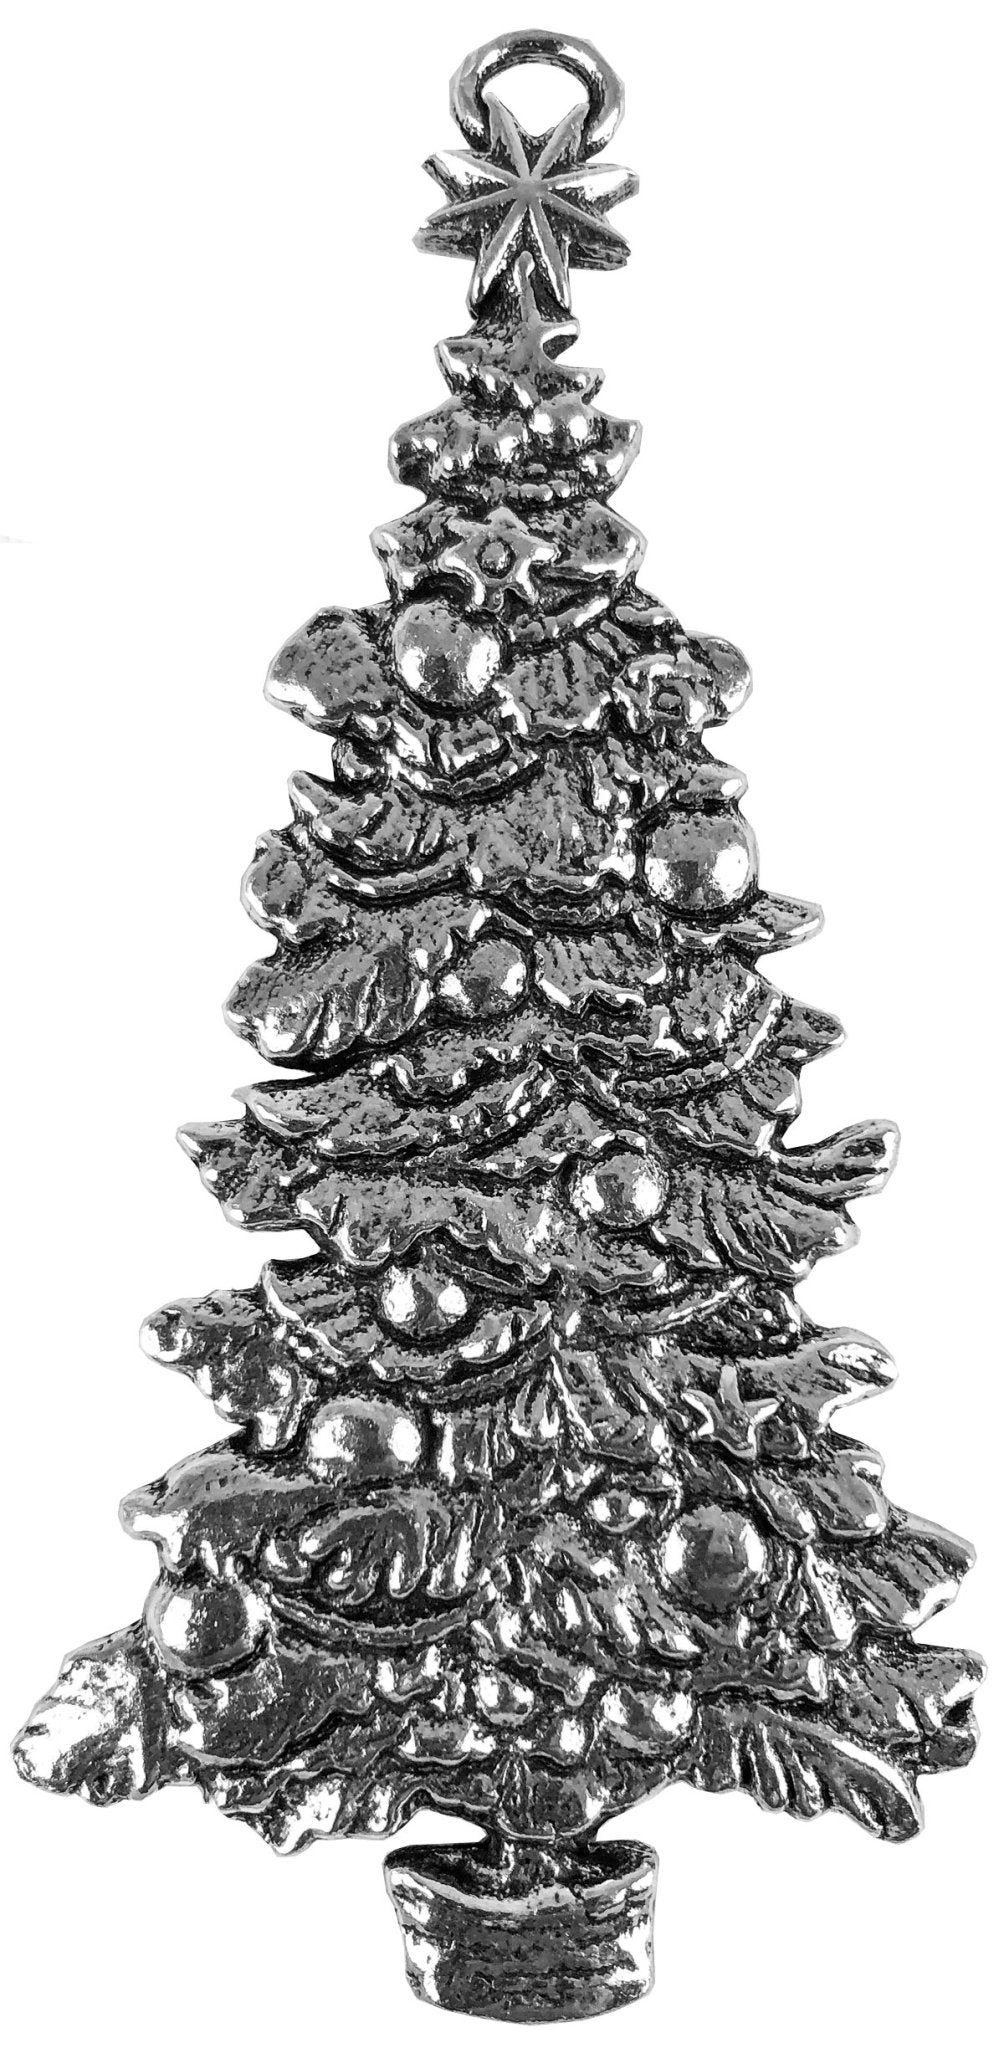 Oberon Design Christmas Tree Metal Collectable Holiday Ornament - Hand Made in The USA